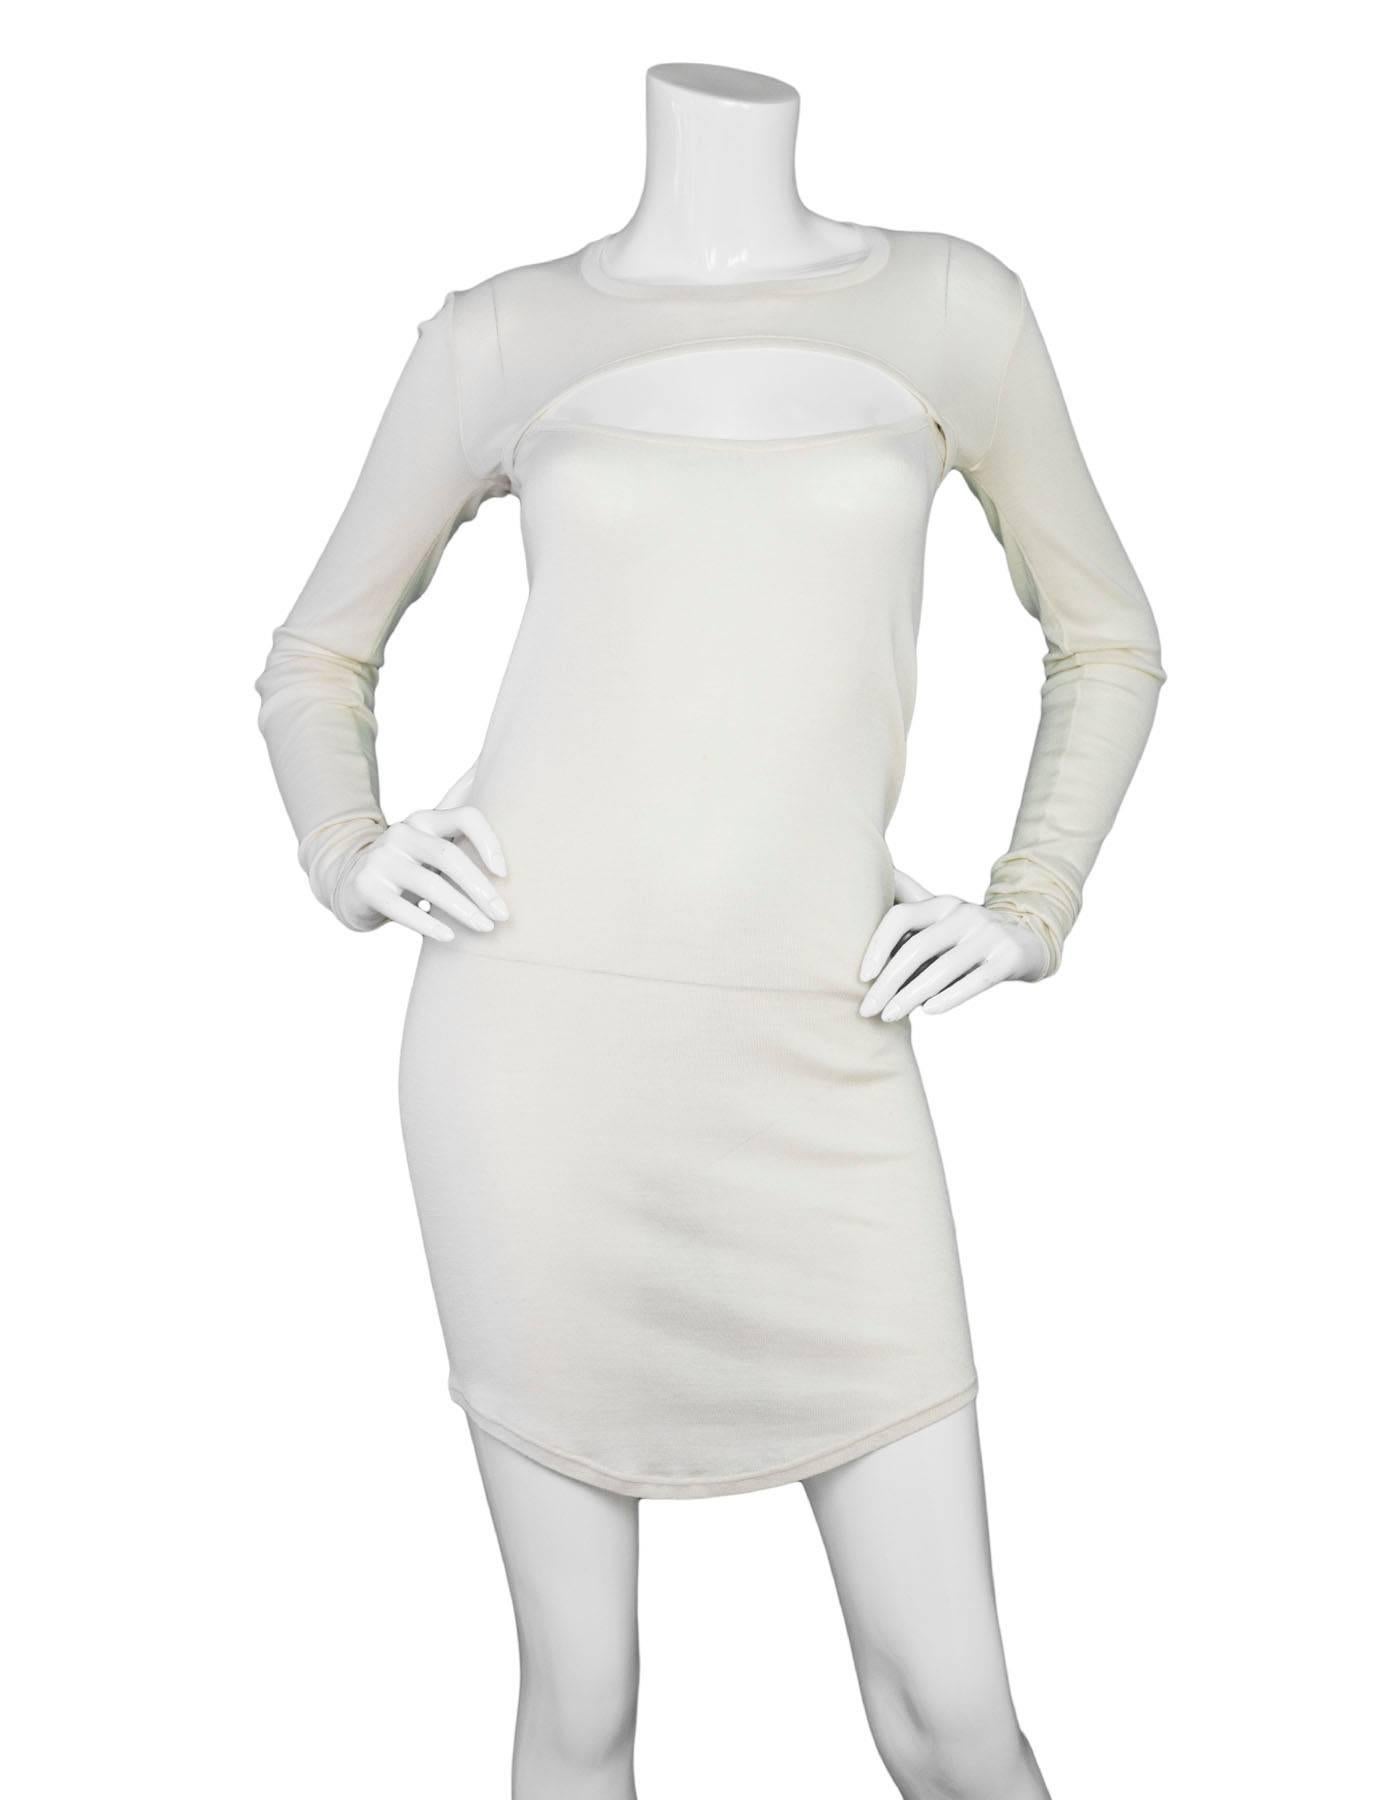 Isabel Marant Ivory Silk Sali Long Sleeve Cut Out Dress 

Made In: France
Color: Ivory
Composition: 100% silk
Lining: None
Closure/Opening: Pull over
Exterior Pockets: None
Interior Pockets: None
Overall Condition: Excellent pre-owned condition with